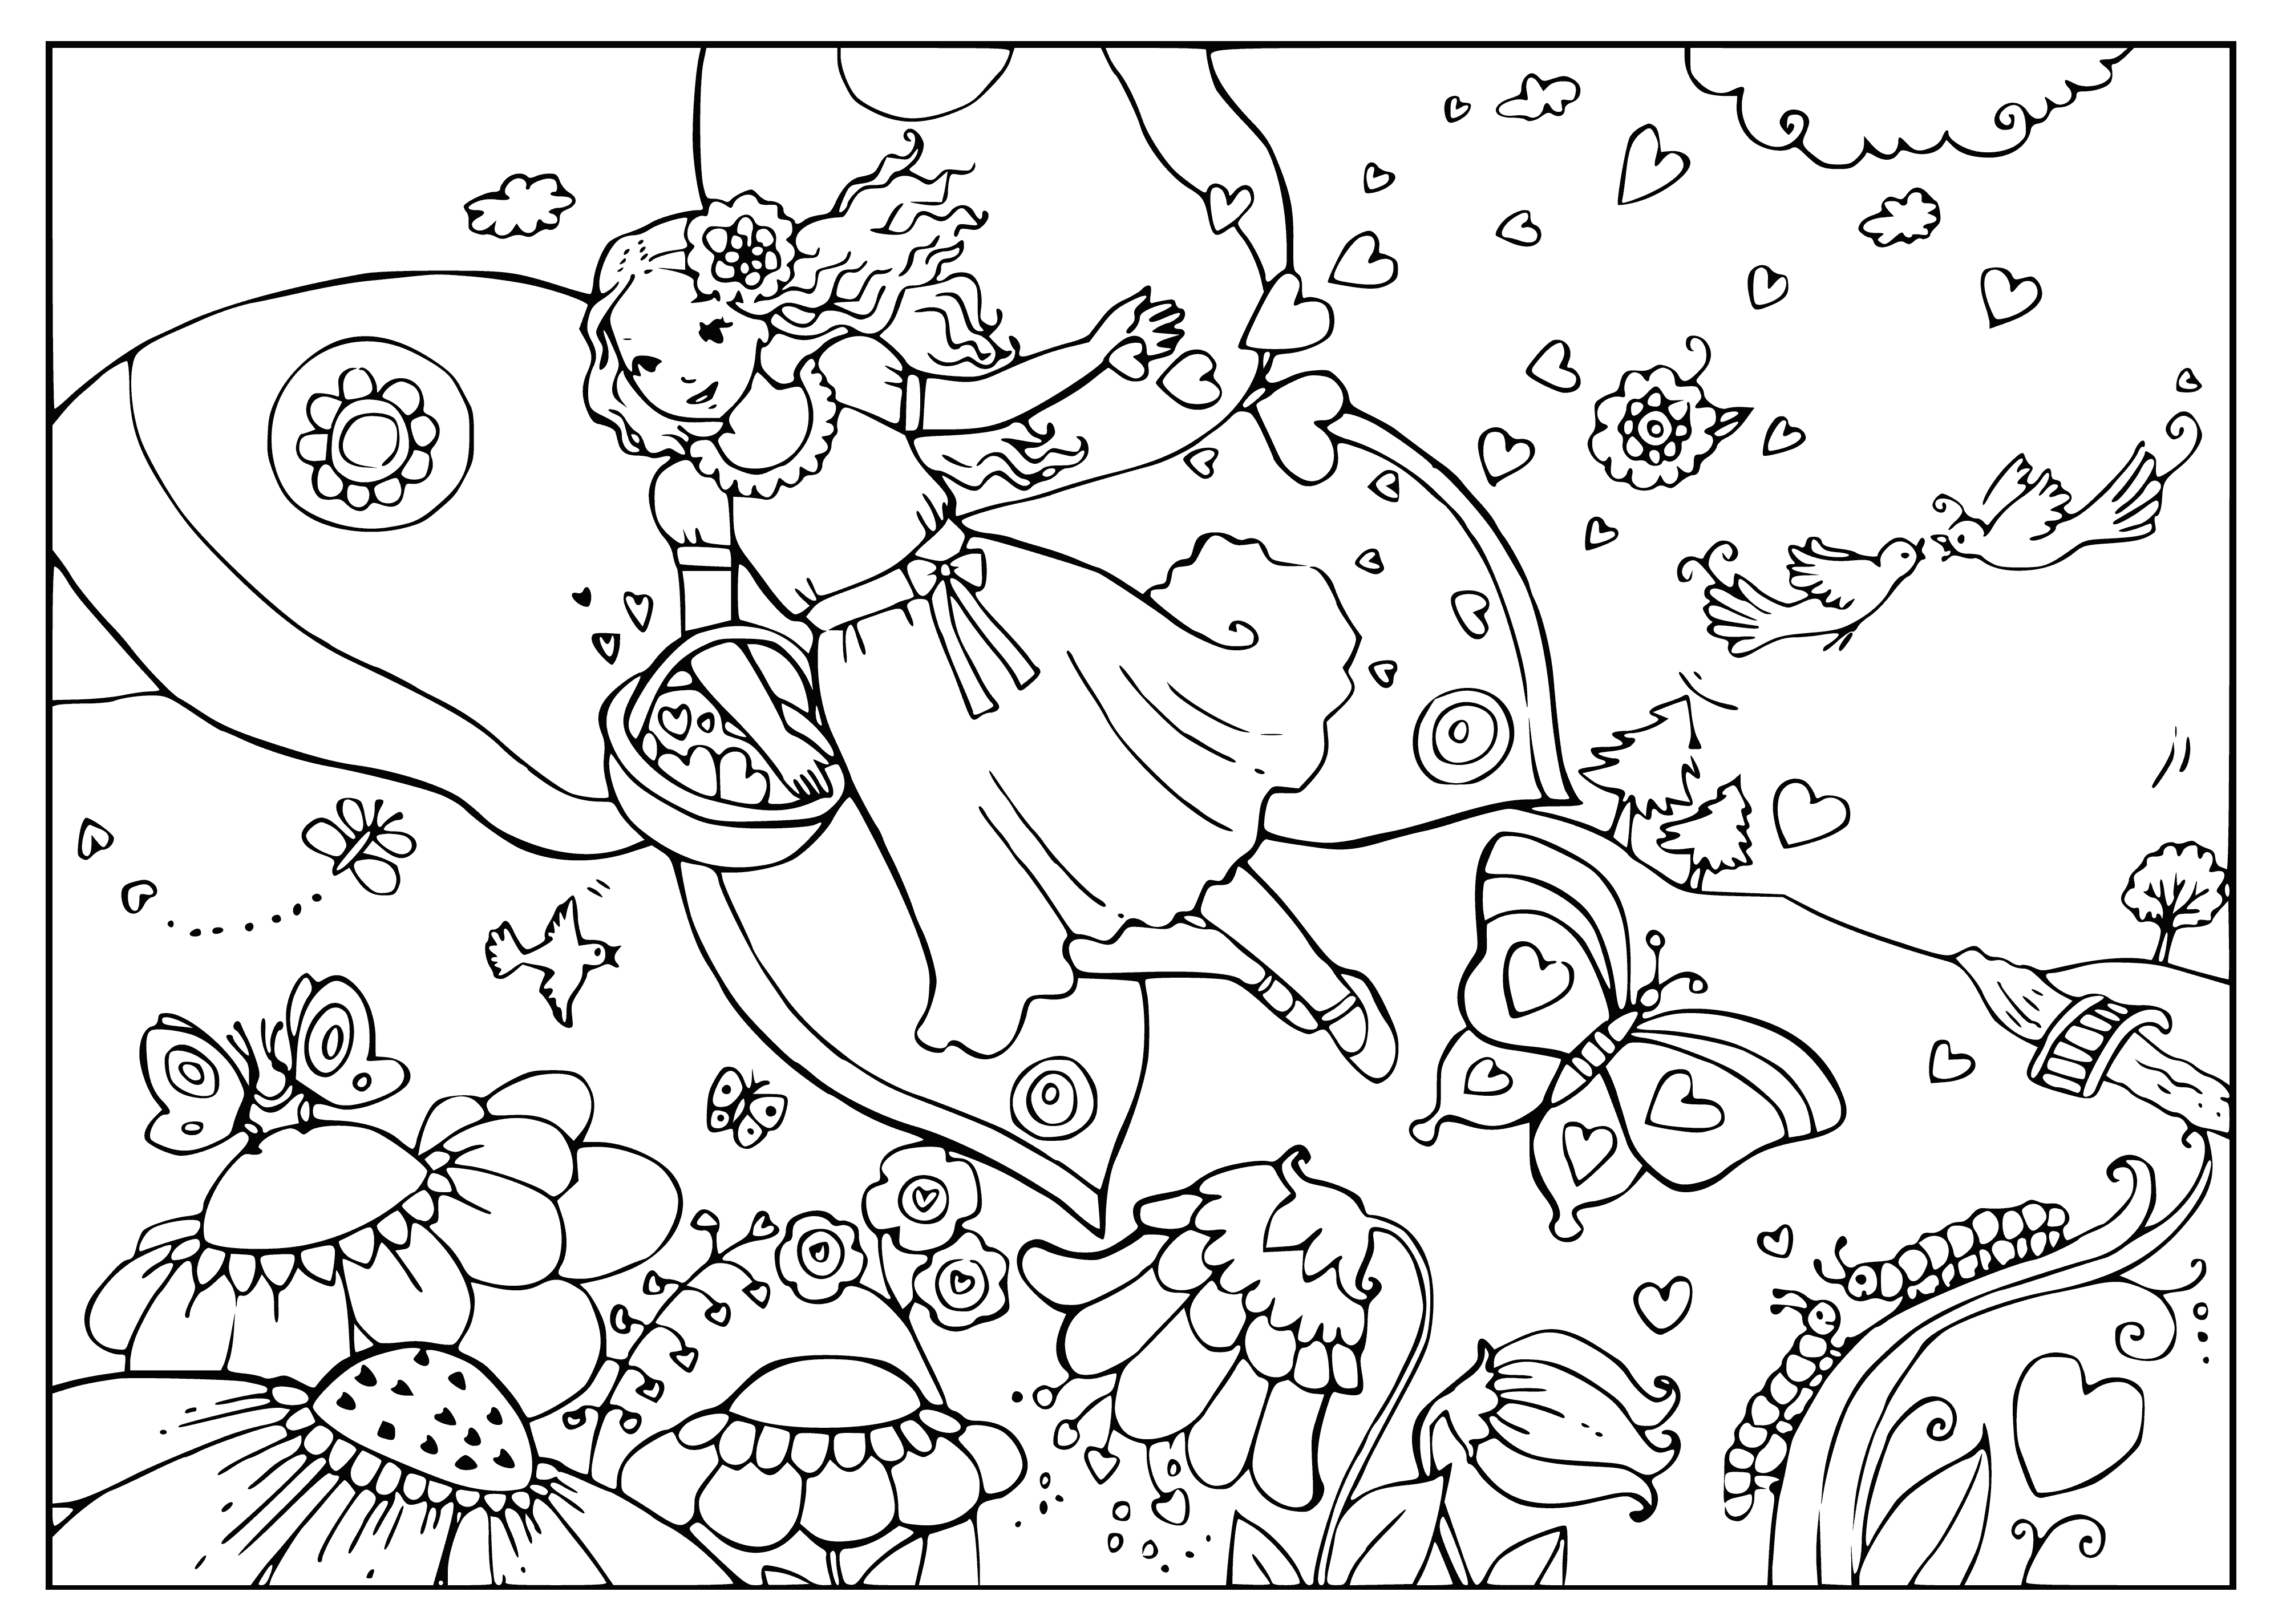 coloring page: Fairy in a meadow full of flowers wearing a dress, holding wand, with flowers in hair and wings.